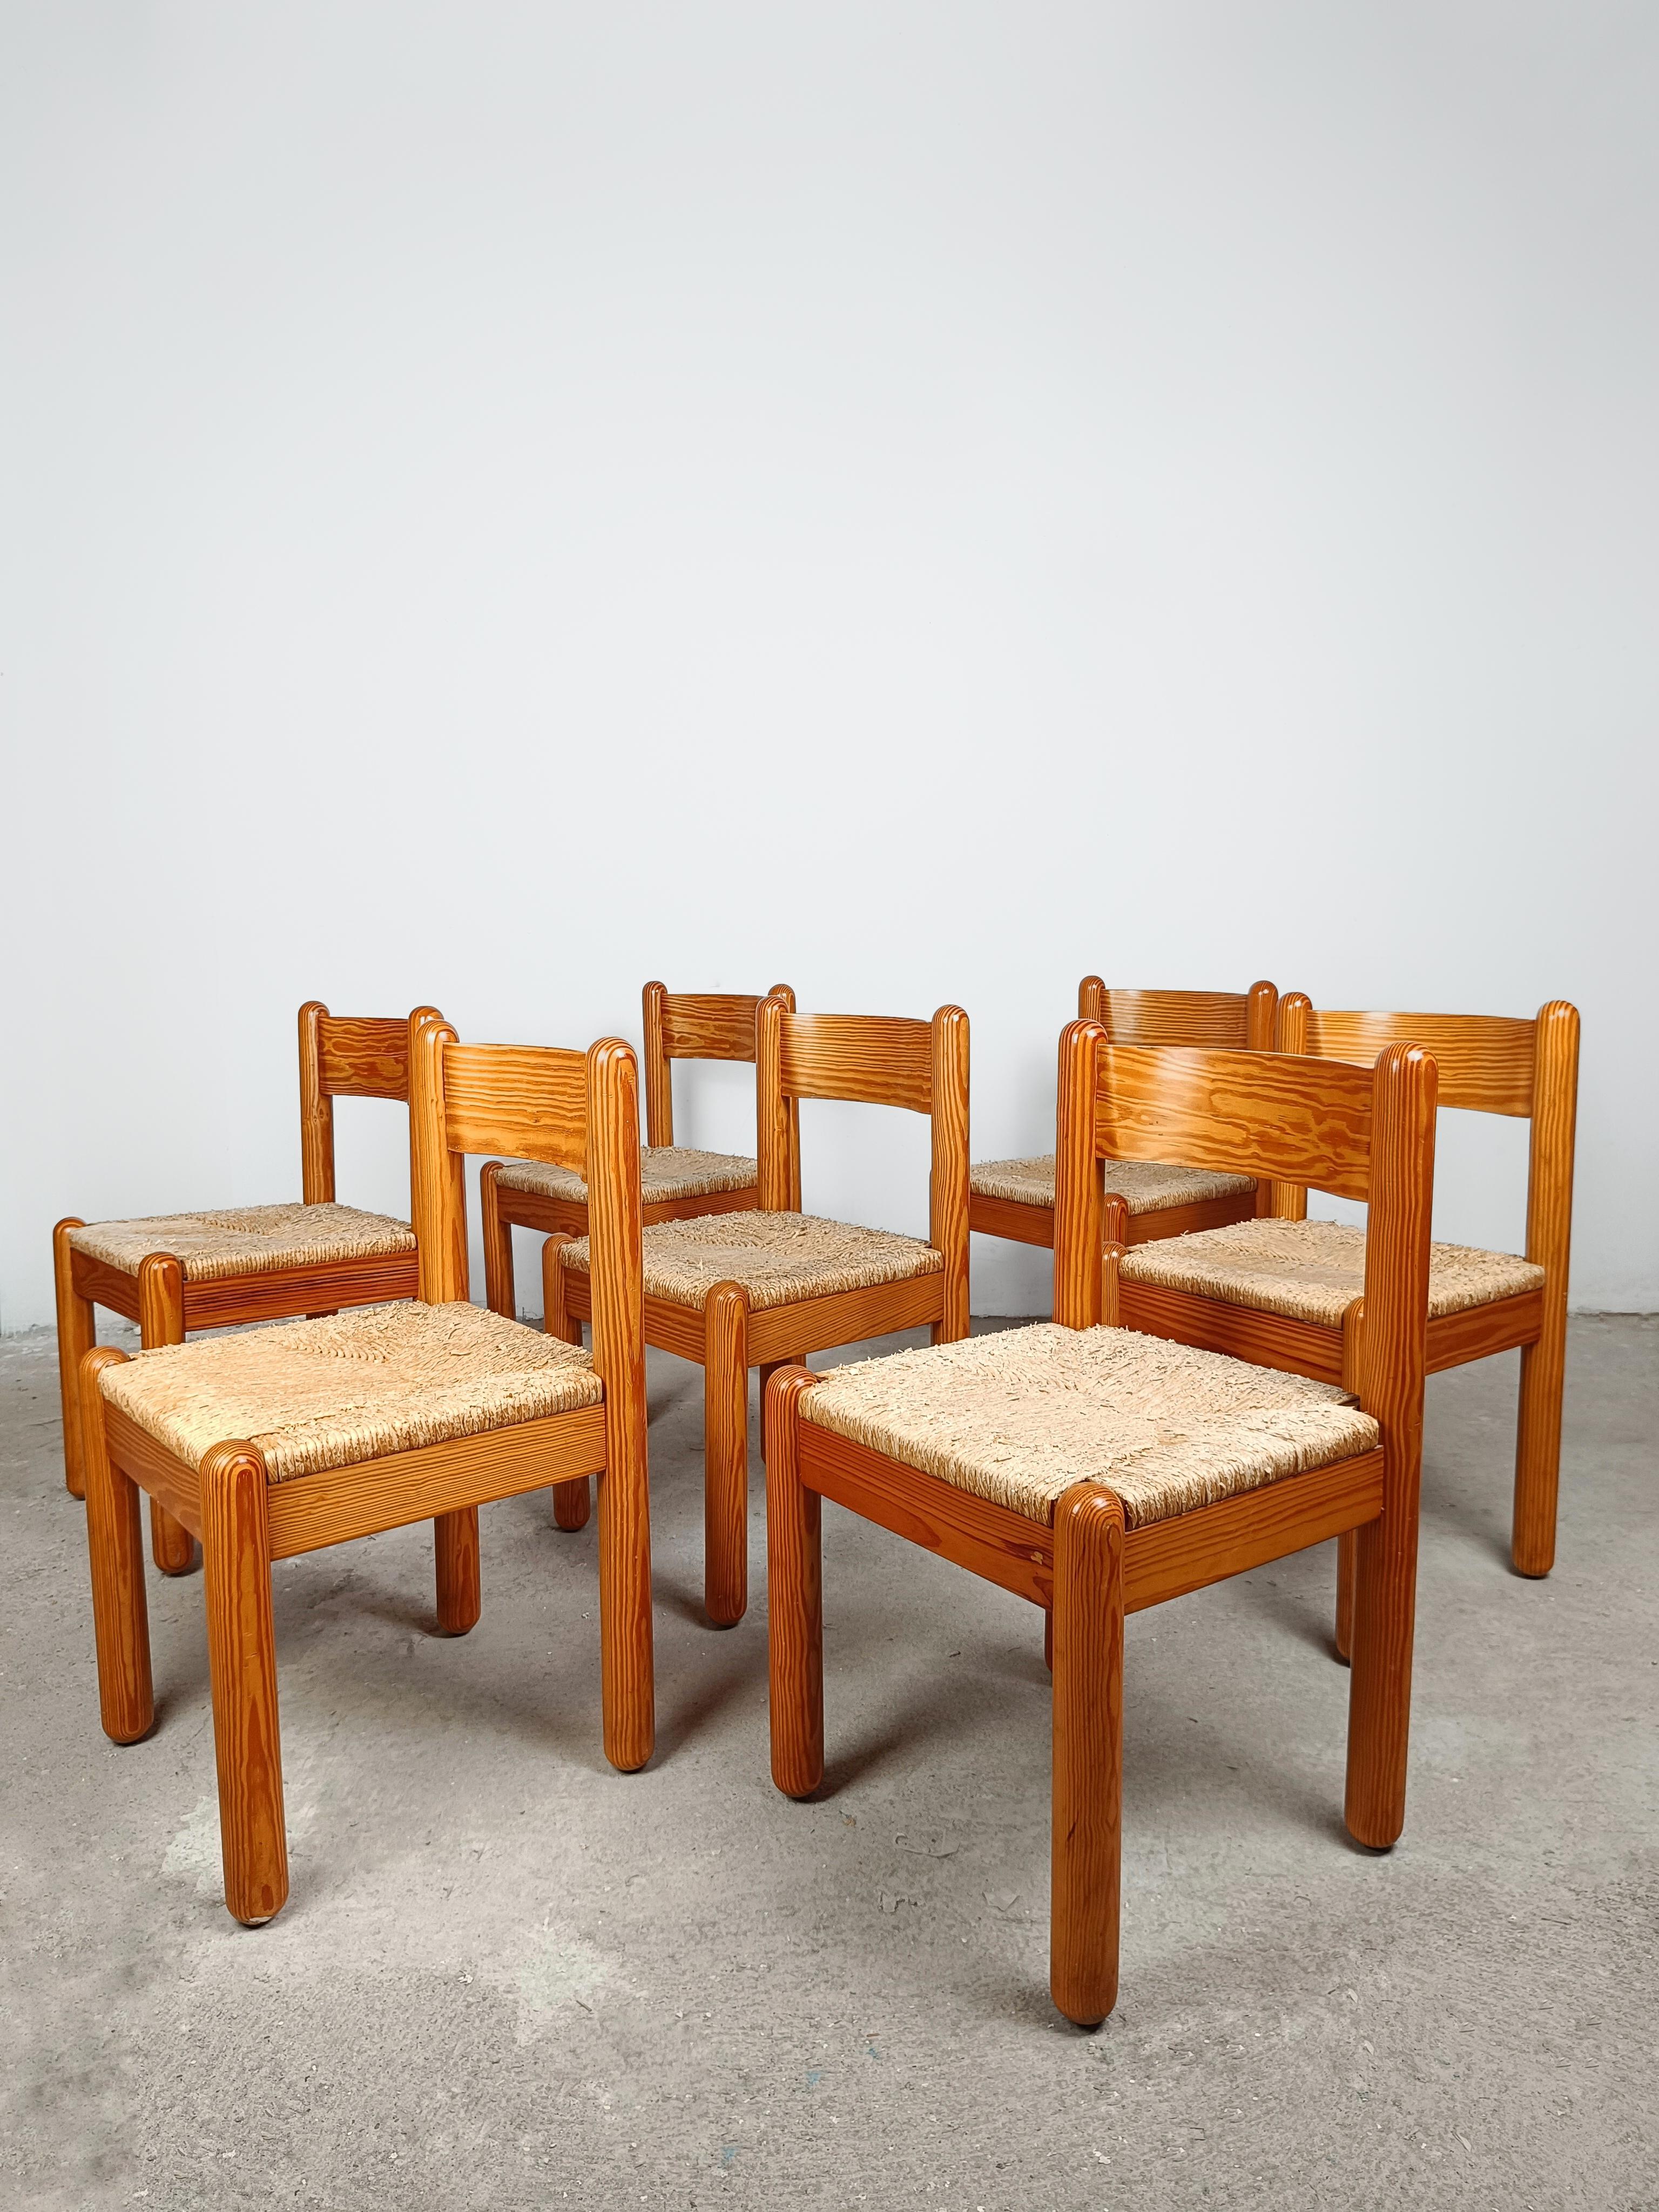 Set of Seven Oak and Rush Chairs in the Style of Charlotte Perriand, 1960s For Sale 2